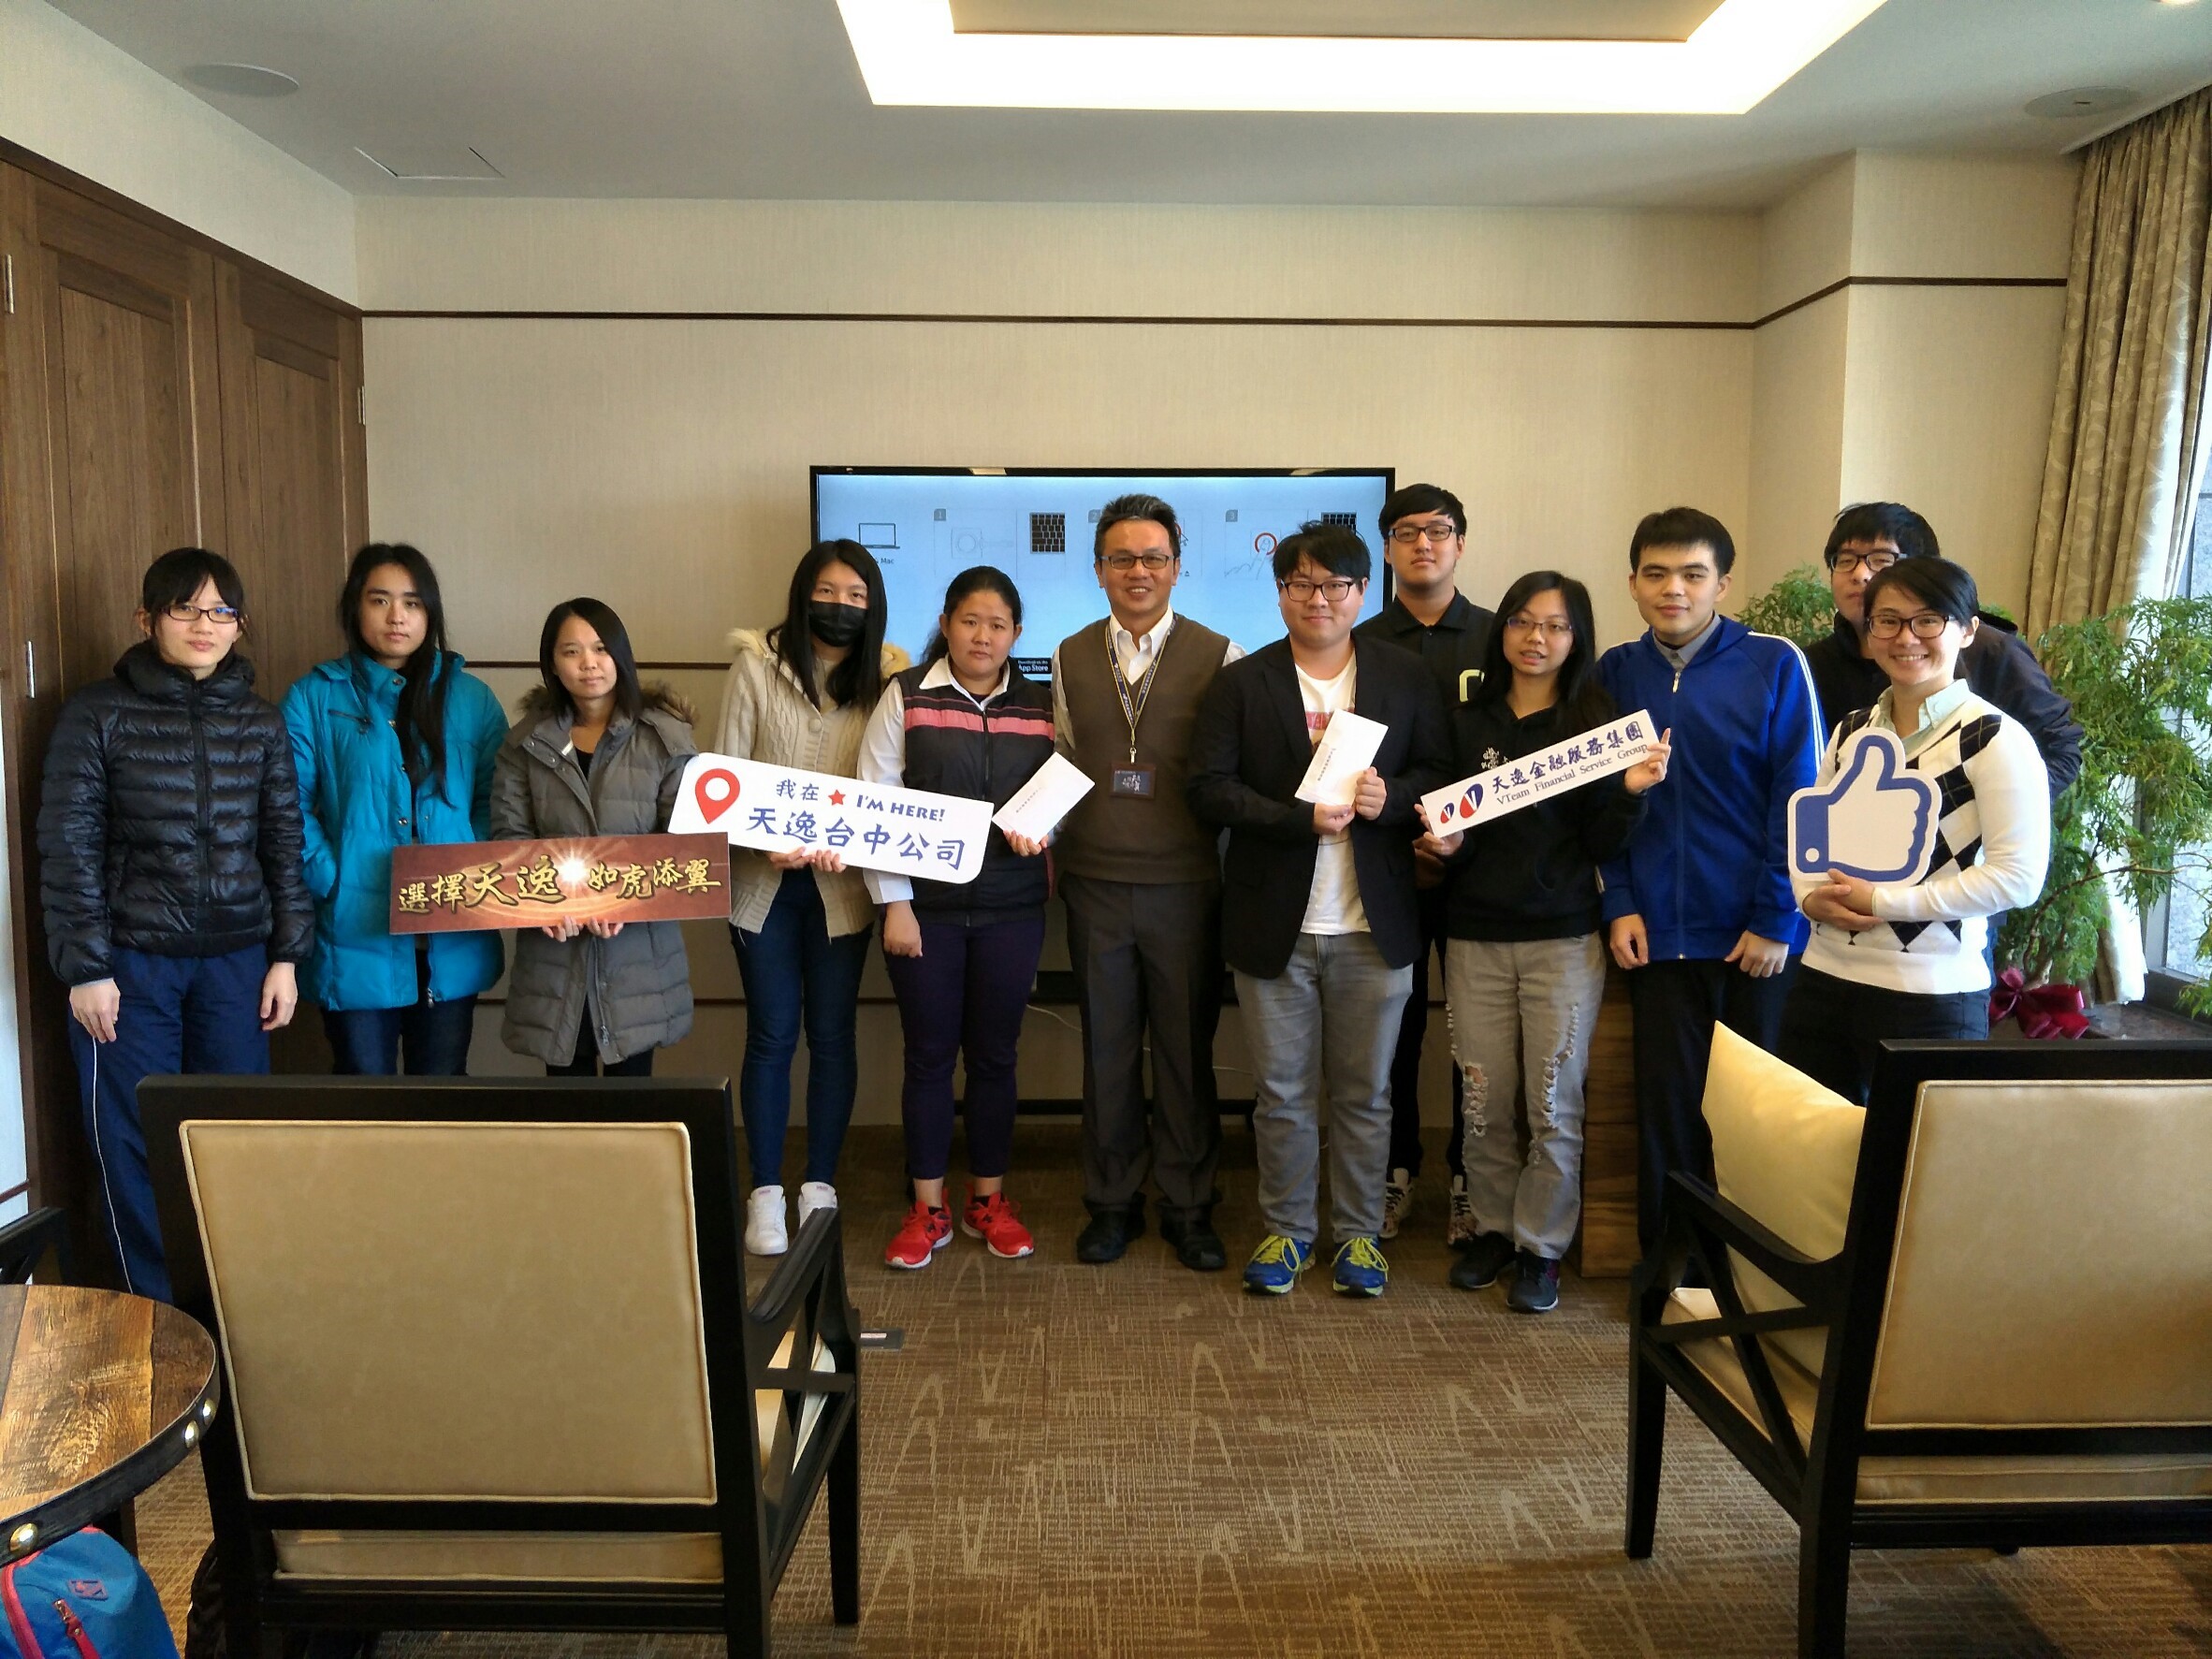 VTeam Taichung is on demand with endless students visit requests